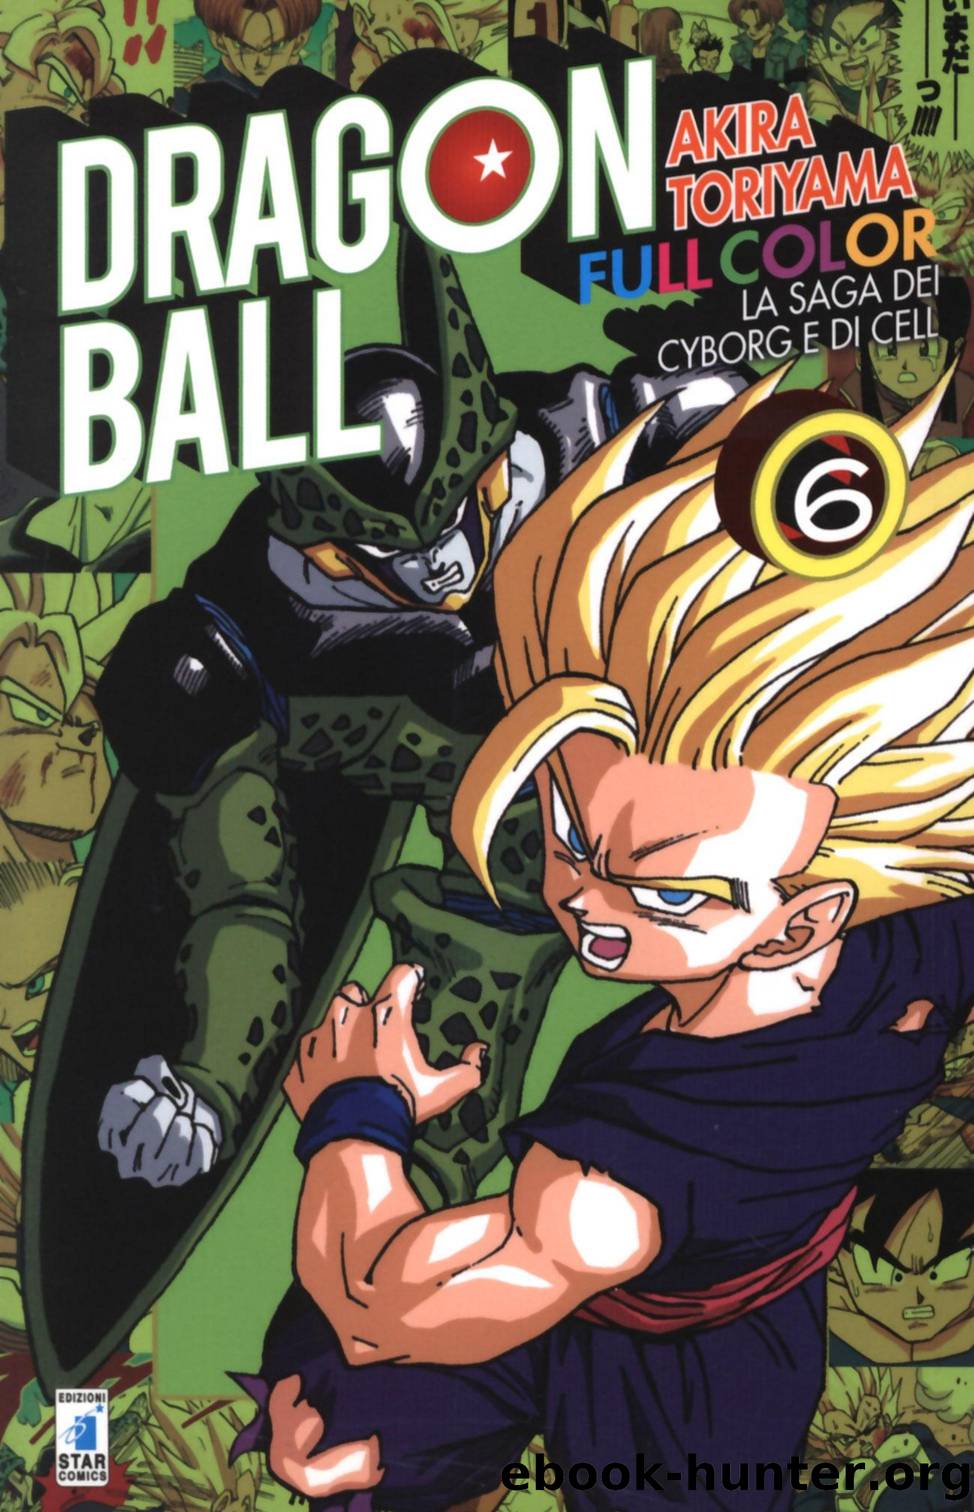 Dragon Ball Full Color [Volume 26] by Unknown